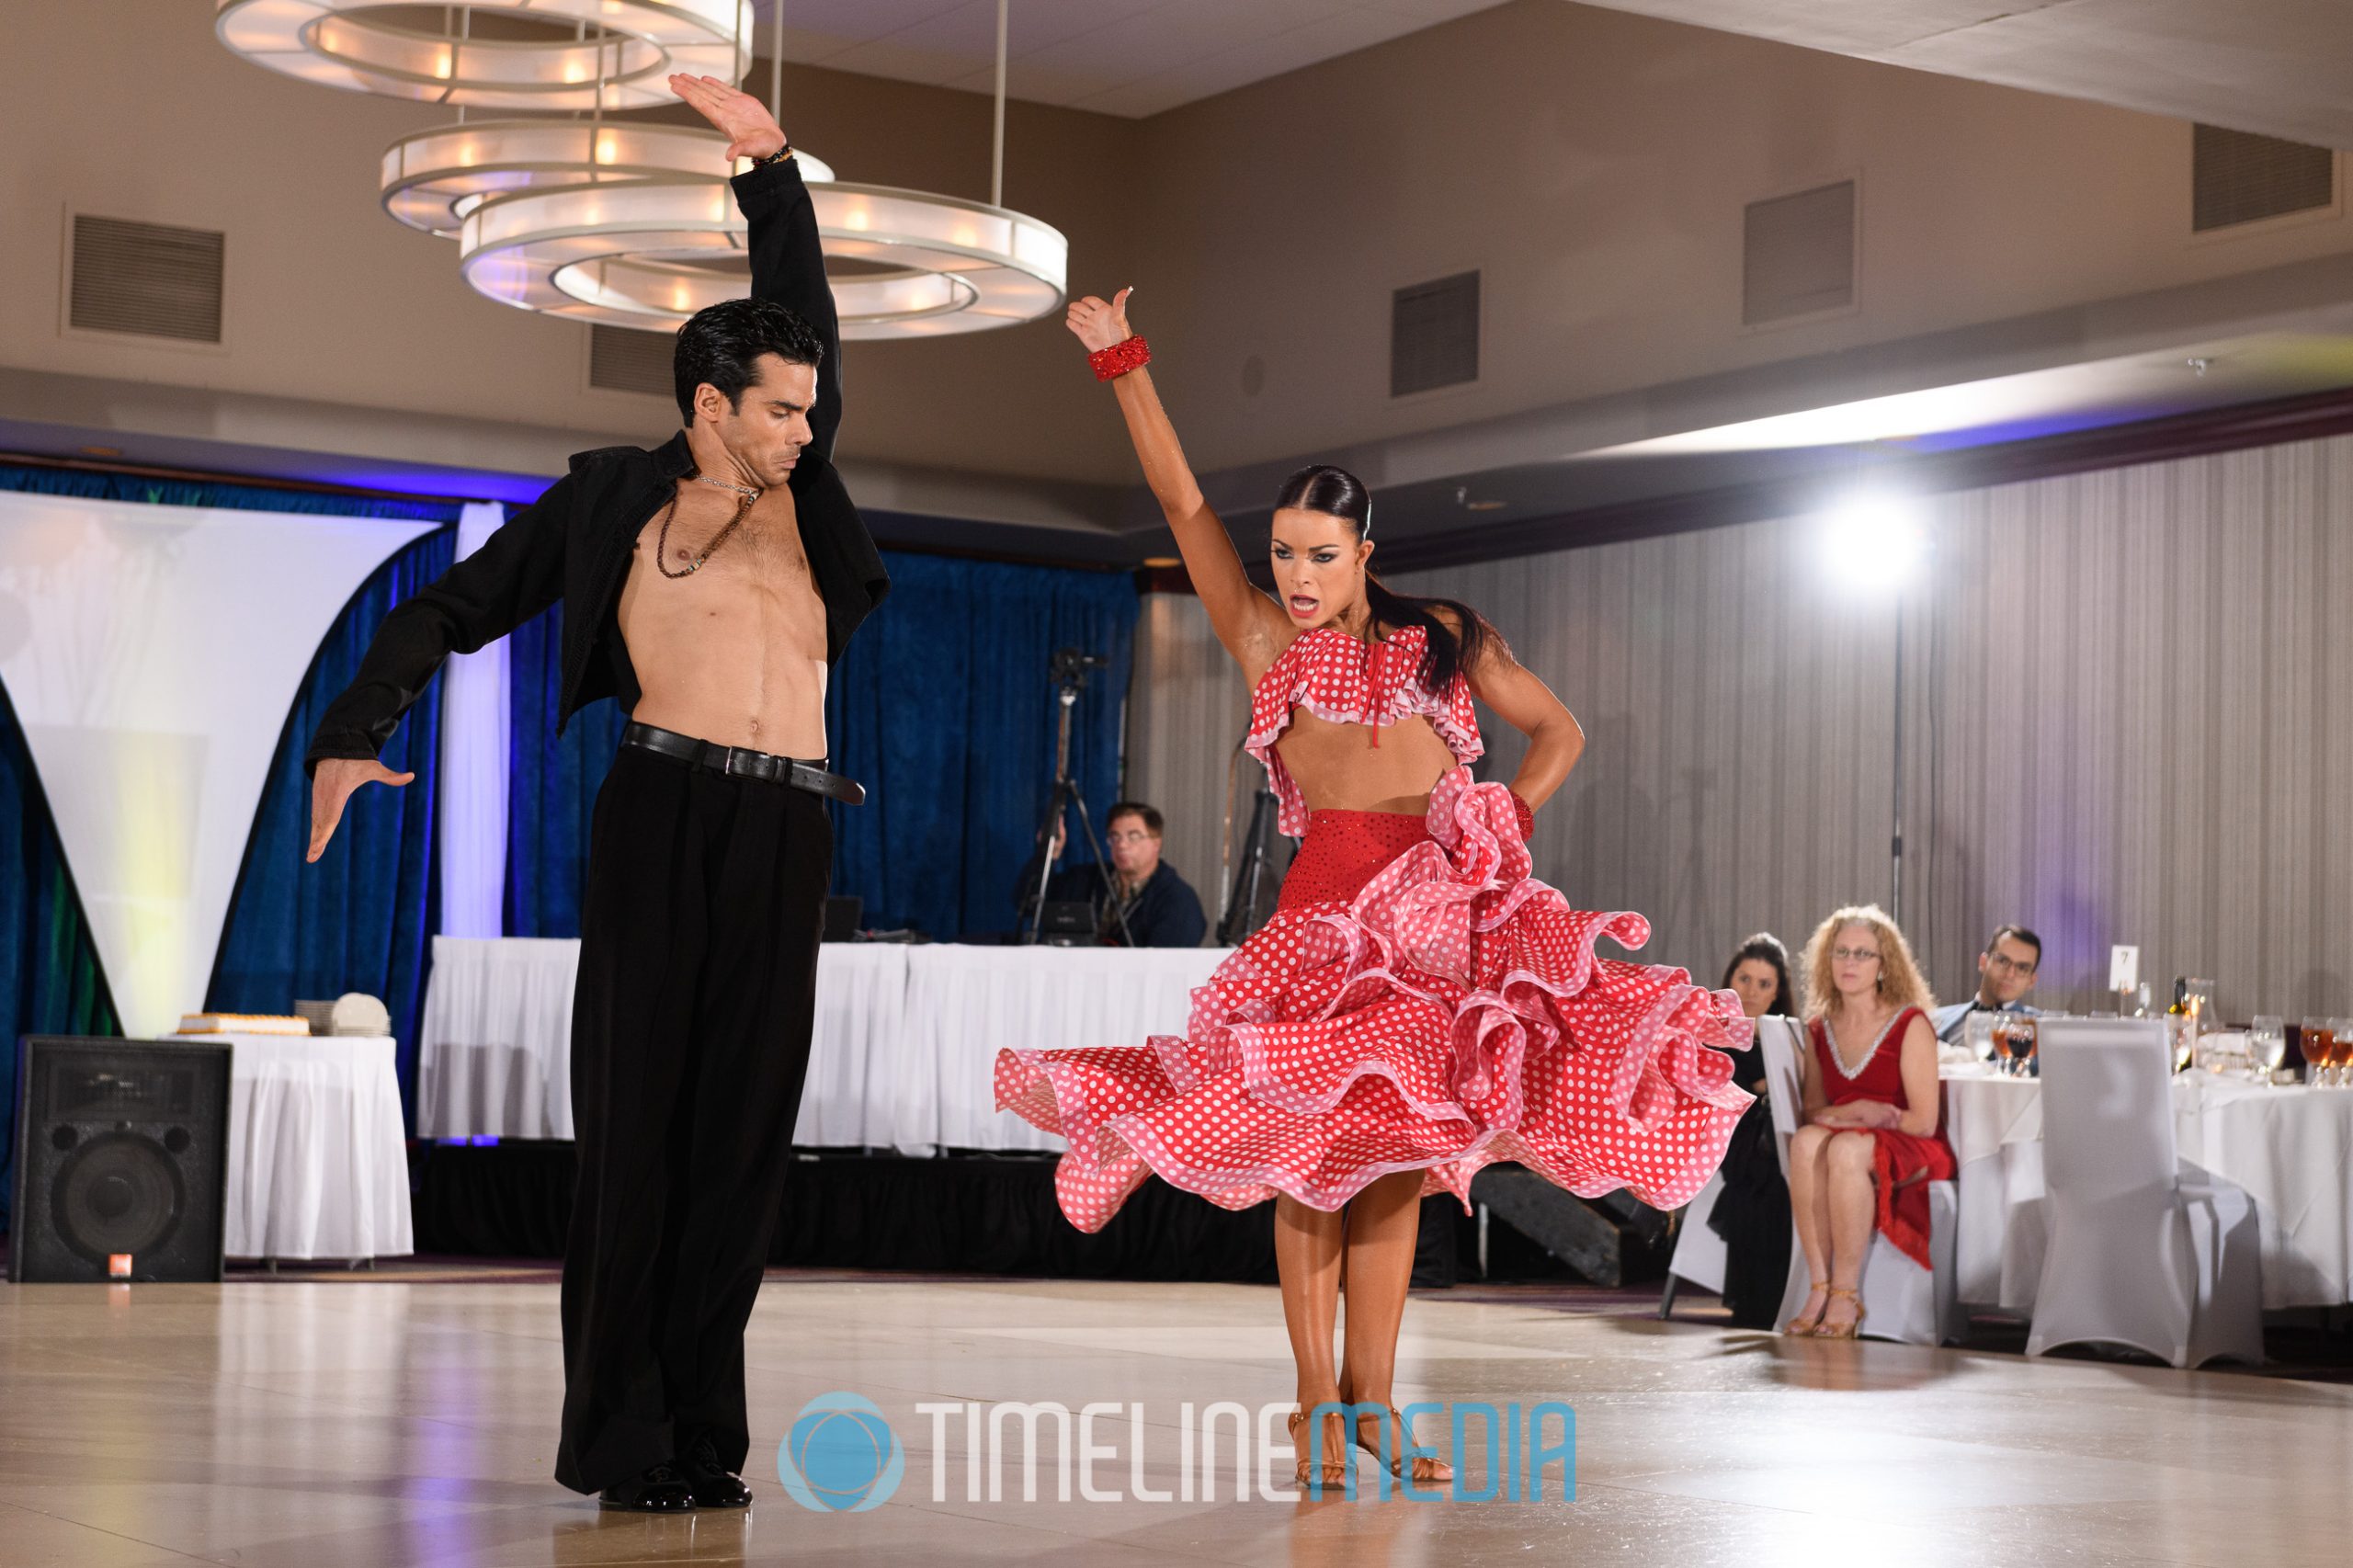 Tal Livshitz and Ilana Keselman dancing a professional show at the Fantasy Ball Dancesport Competition ©TimeLine Media